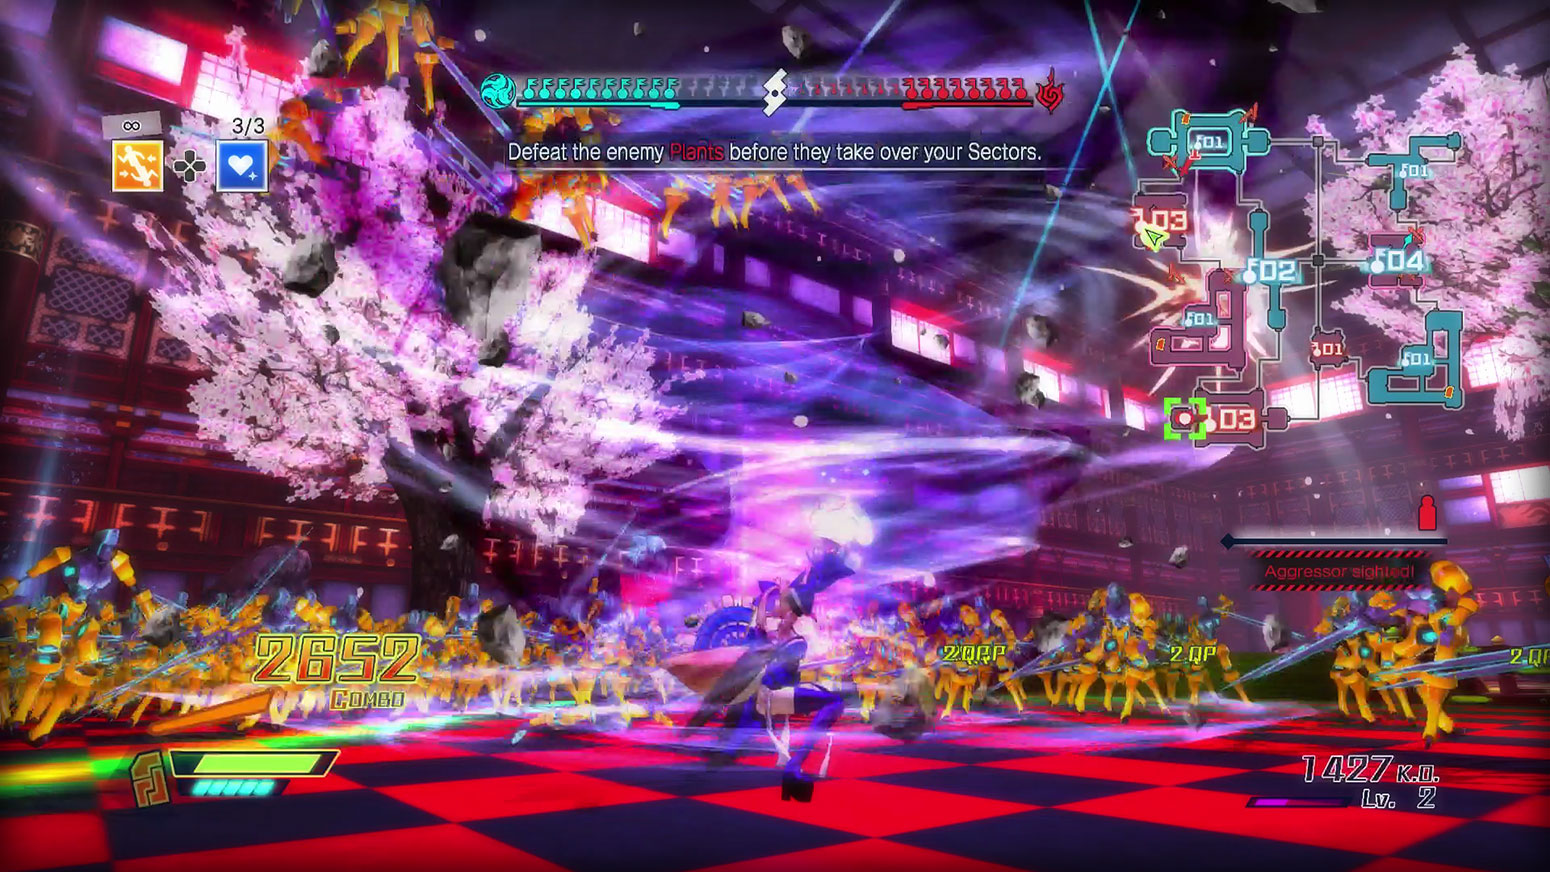 Fate/EXTELLA: The Umbral Star - High Speed Servant Action Screenshot 2